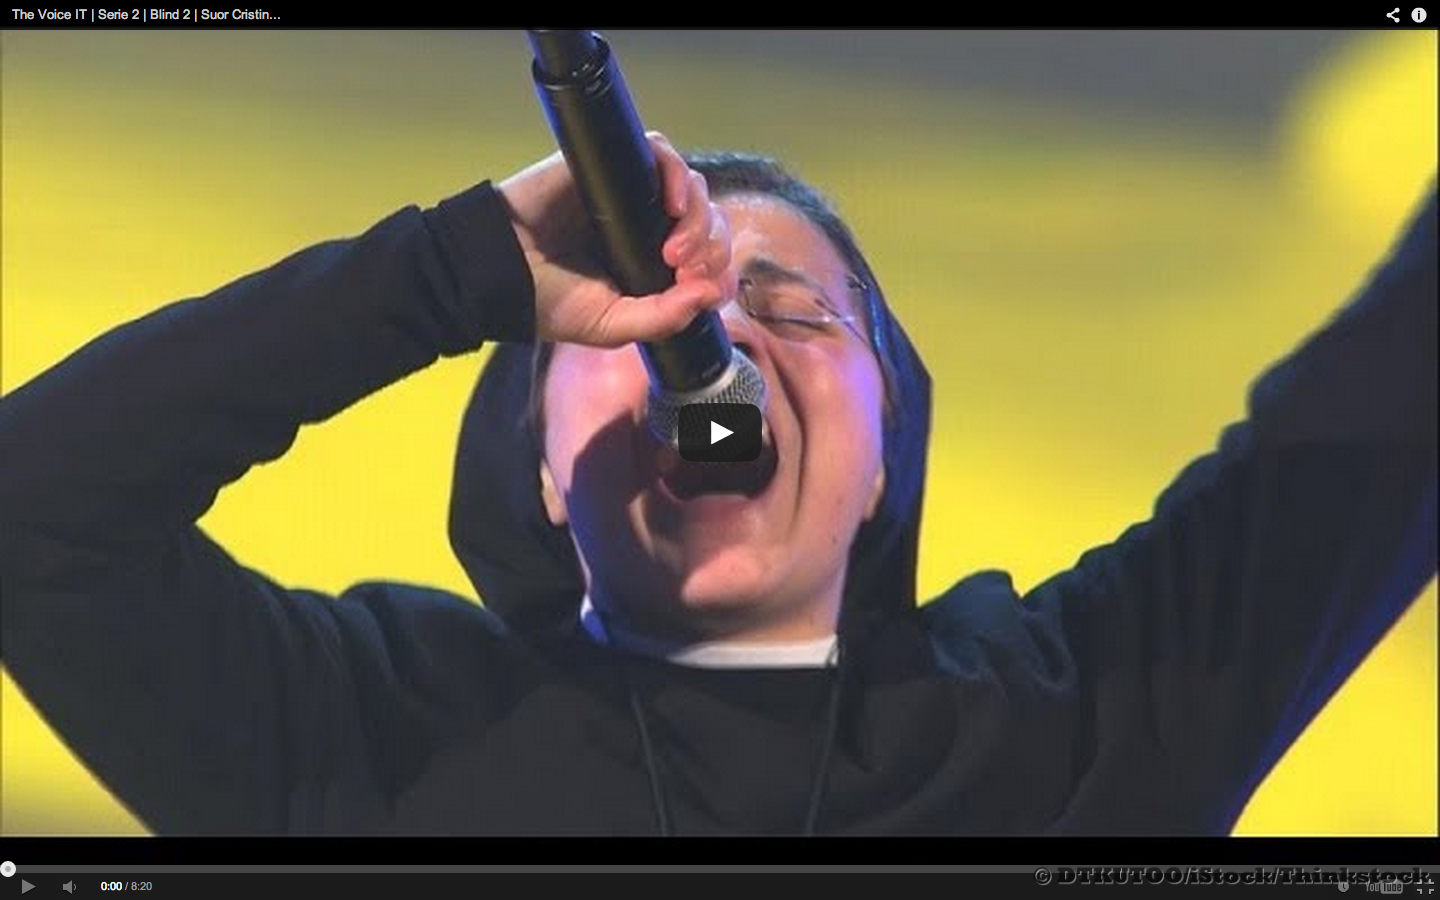 Nun Steals Our Hearts and the Show on “The Voice”